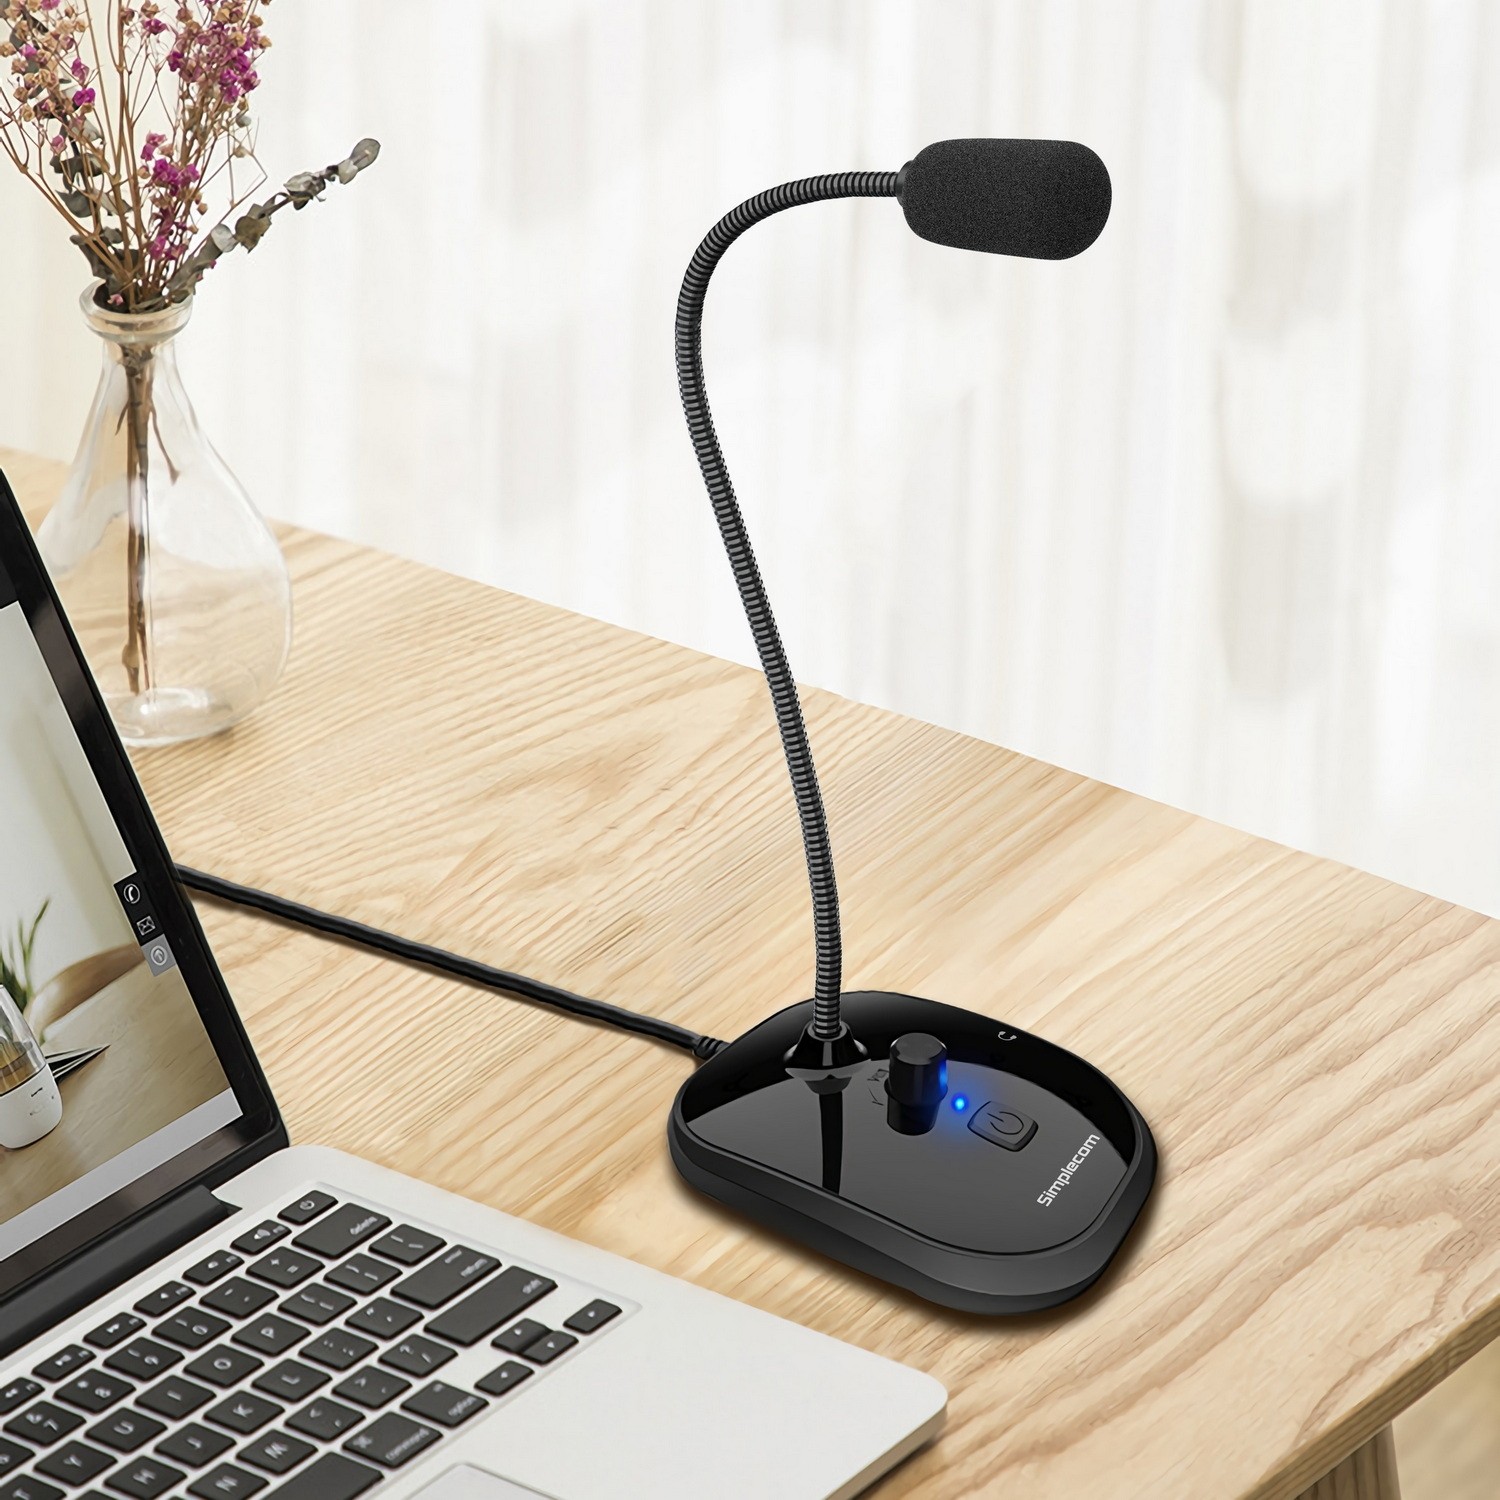 A large marketing image providing additional information about the product Simplecom UM360 Plug and Play USB Desktop Microphone with Headphone Jack - Additional alt info not provided